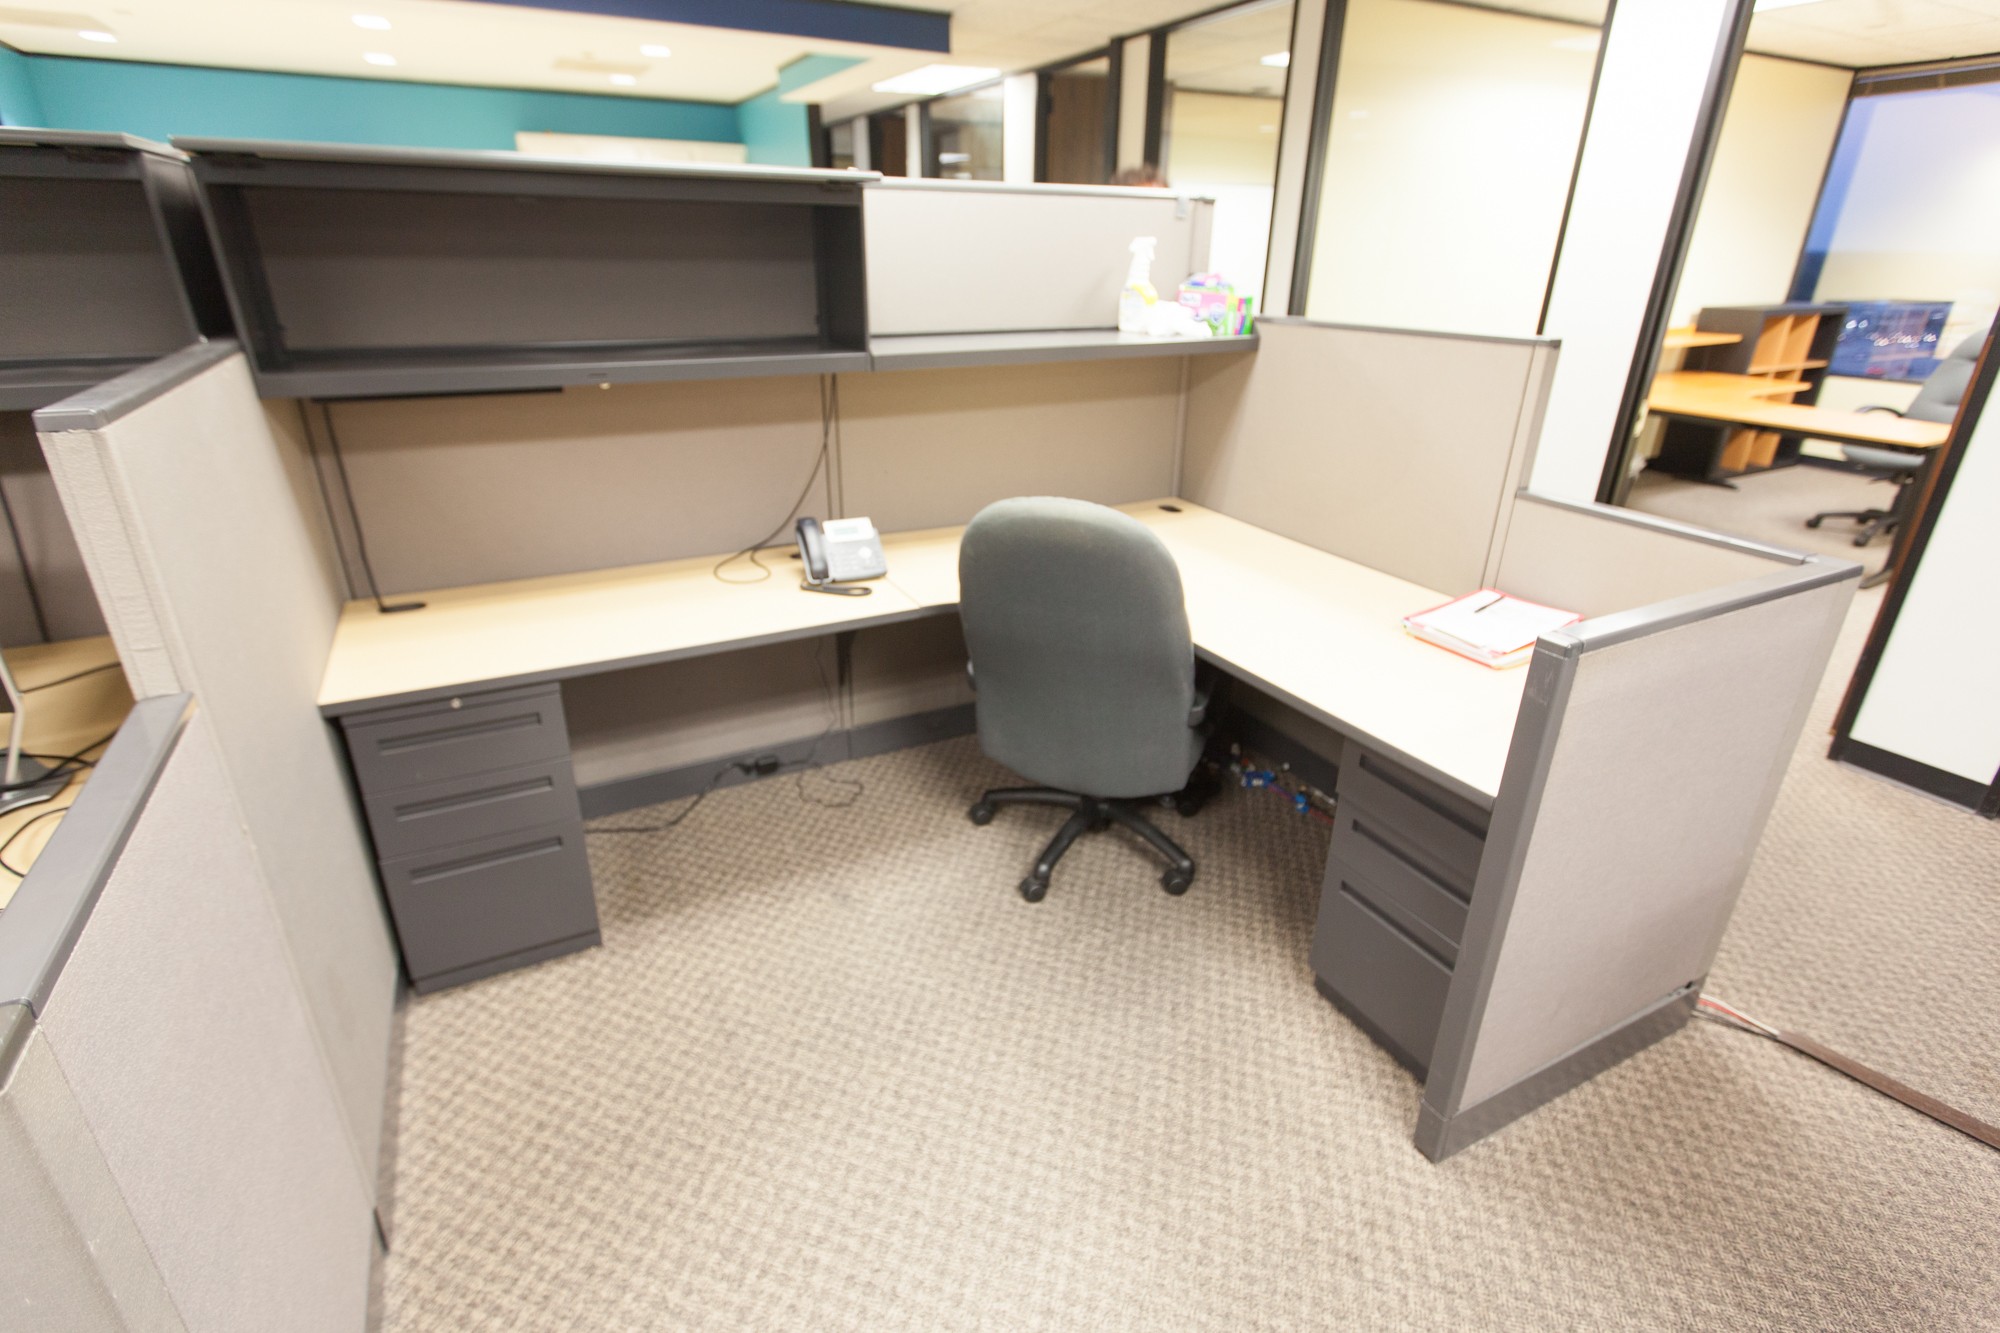 Steelcase Cubicles for Offices-1216